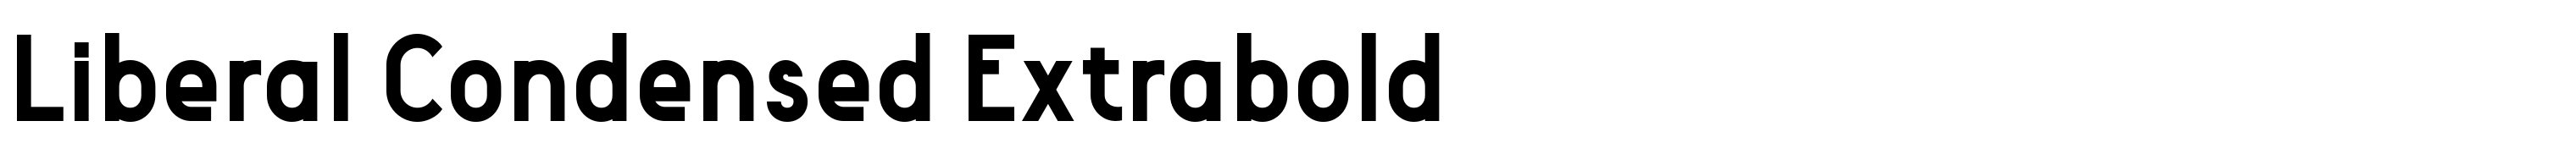 Liberal Condensed Extrabold